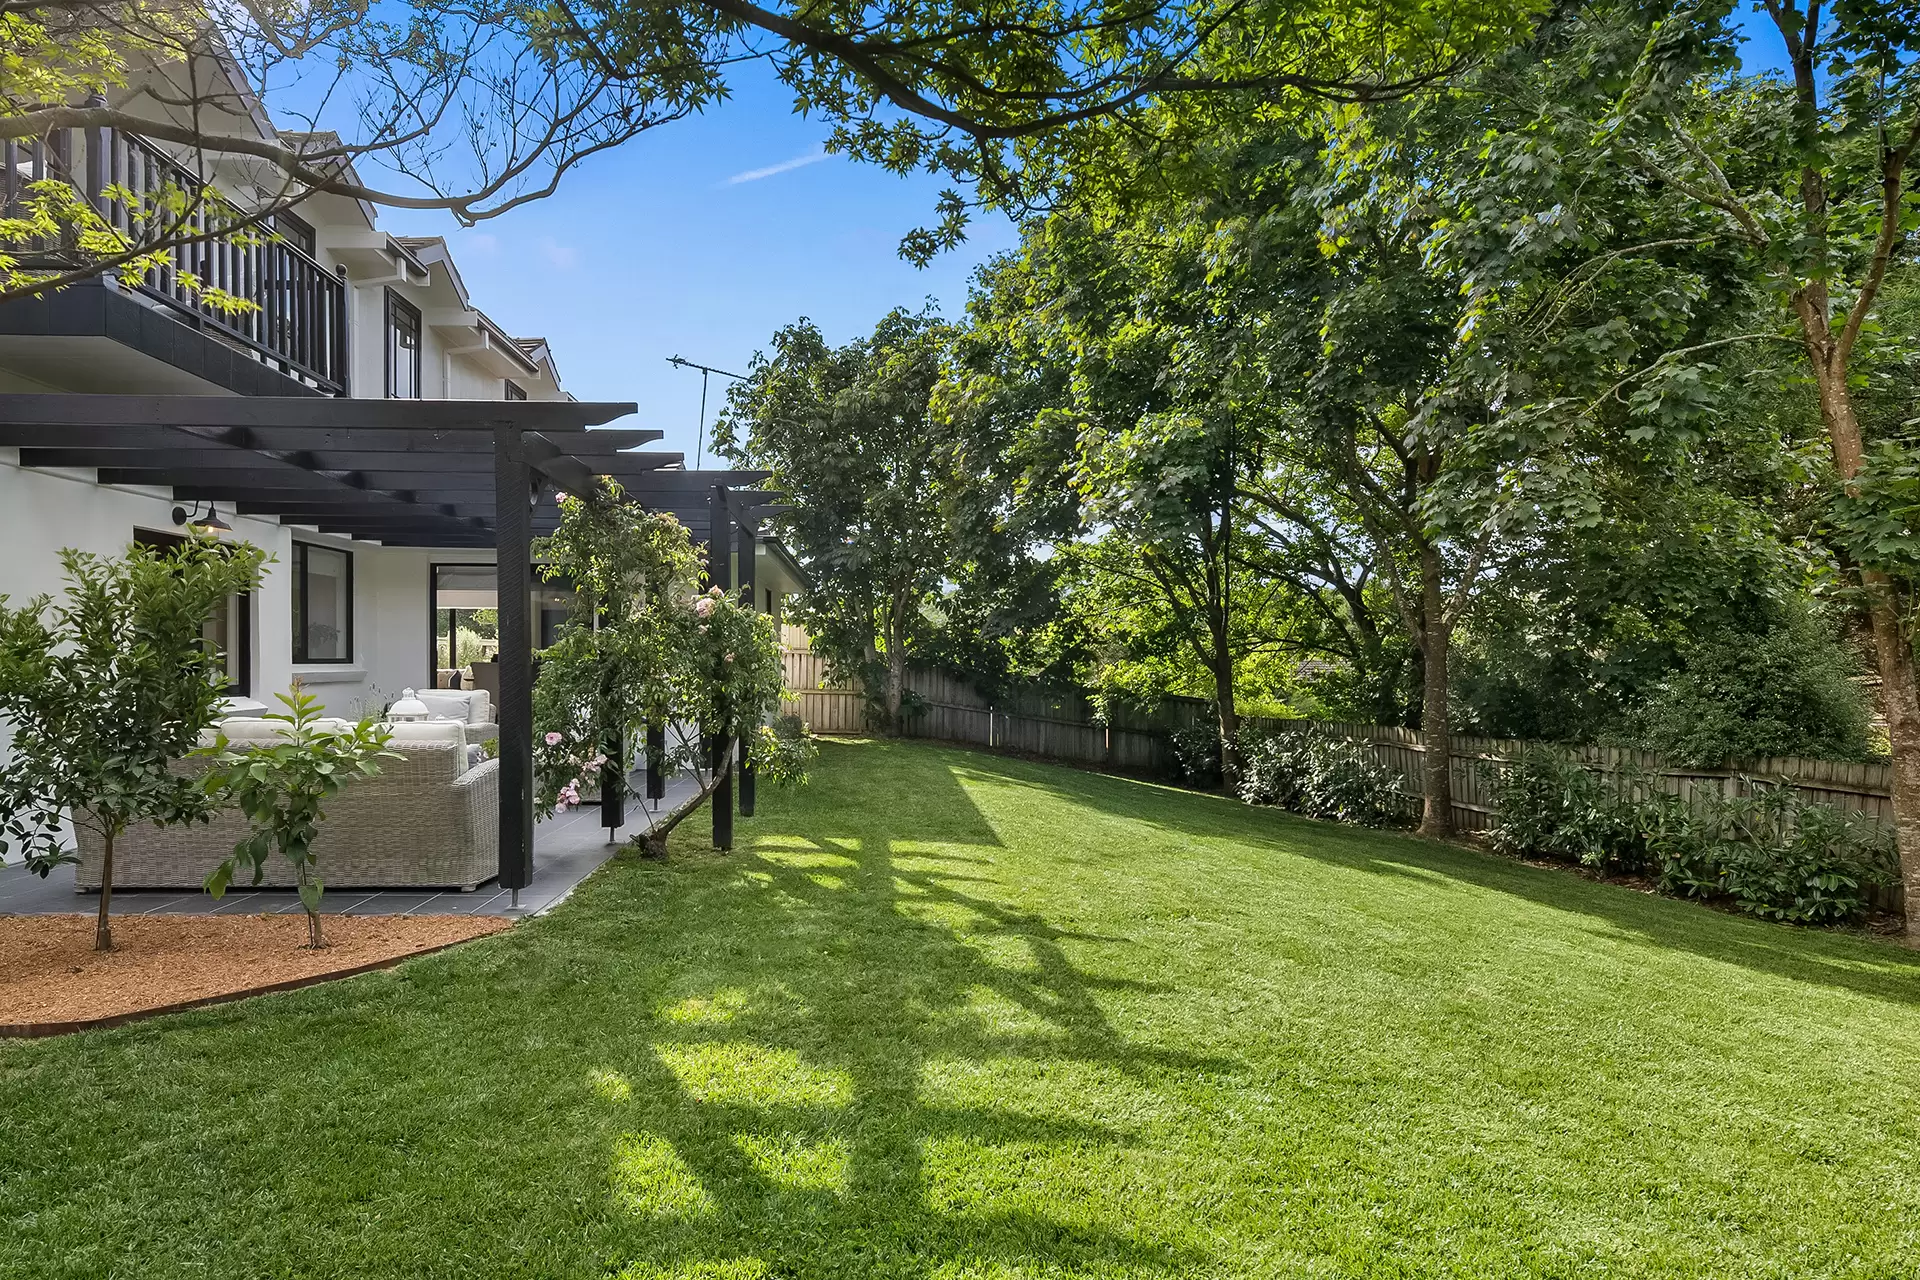 Photo #15: 11 Plane Tree Close, Bowral - Sold by Drew Lindsay Sotheby's International Realty